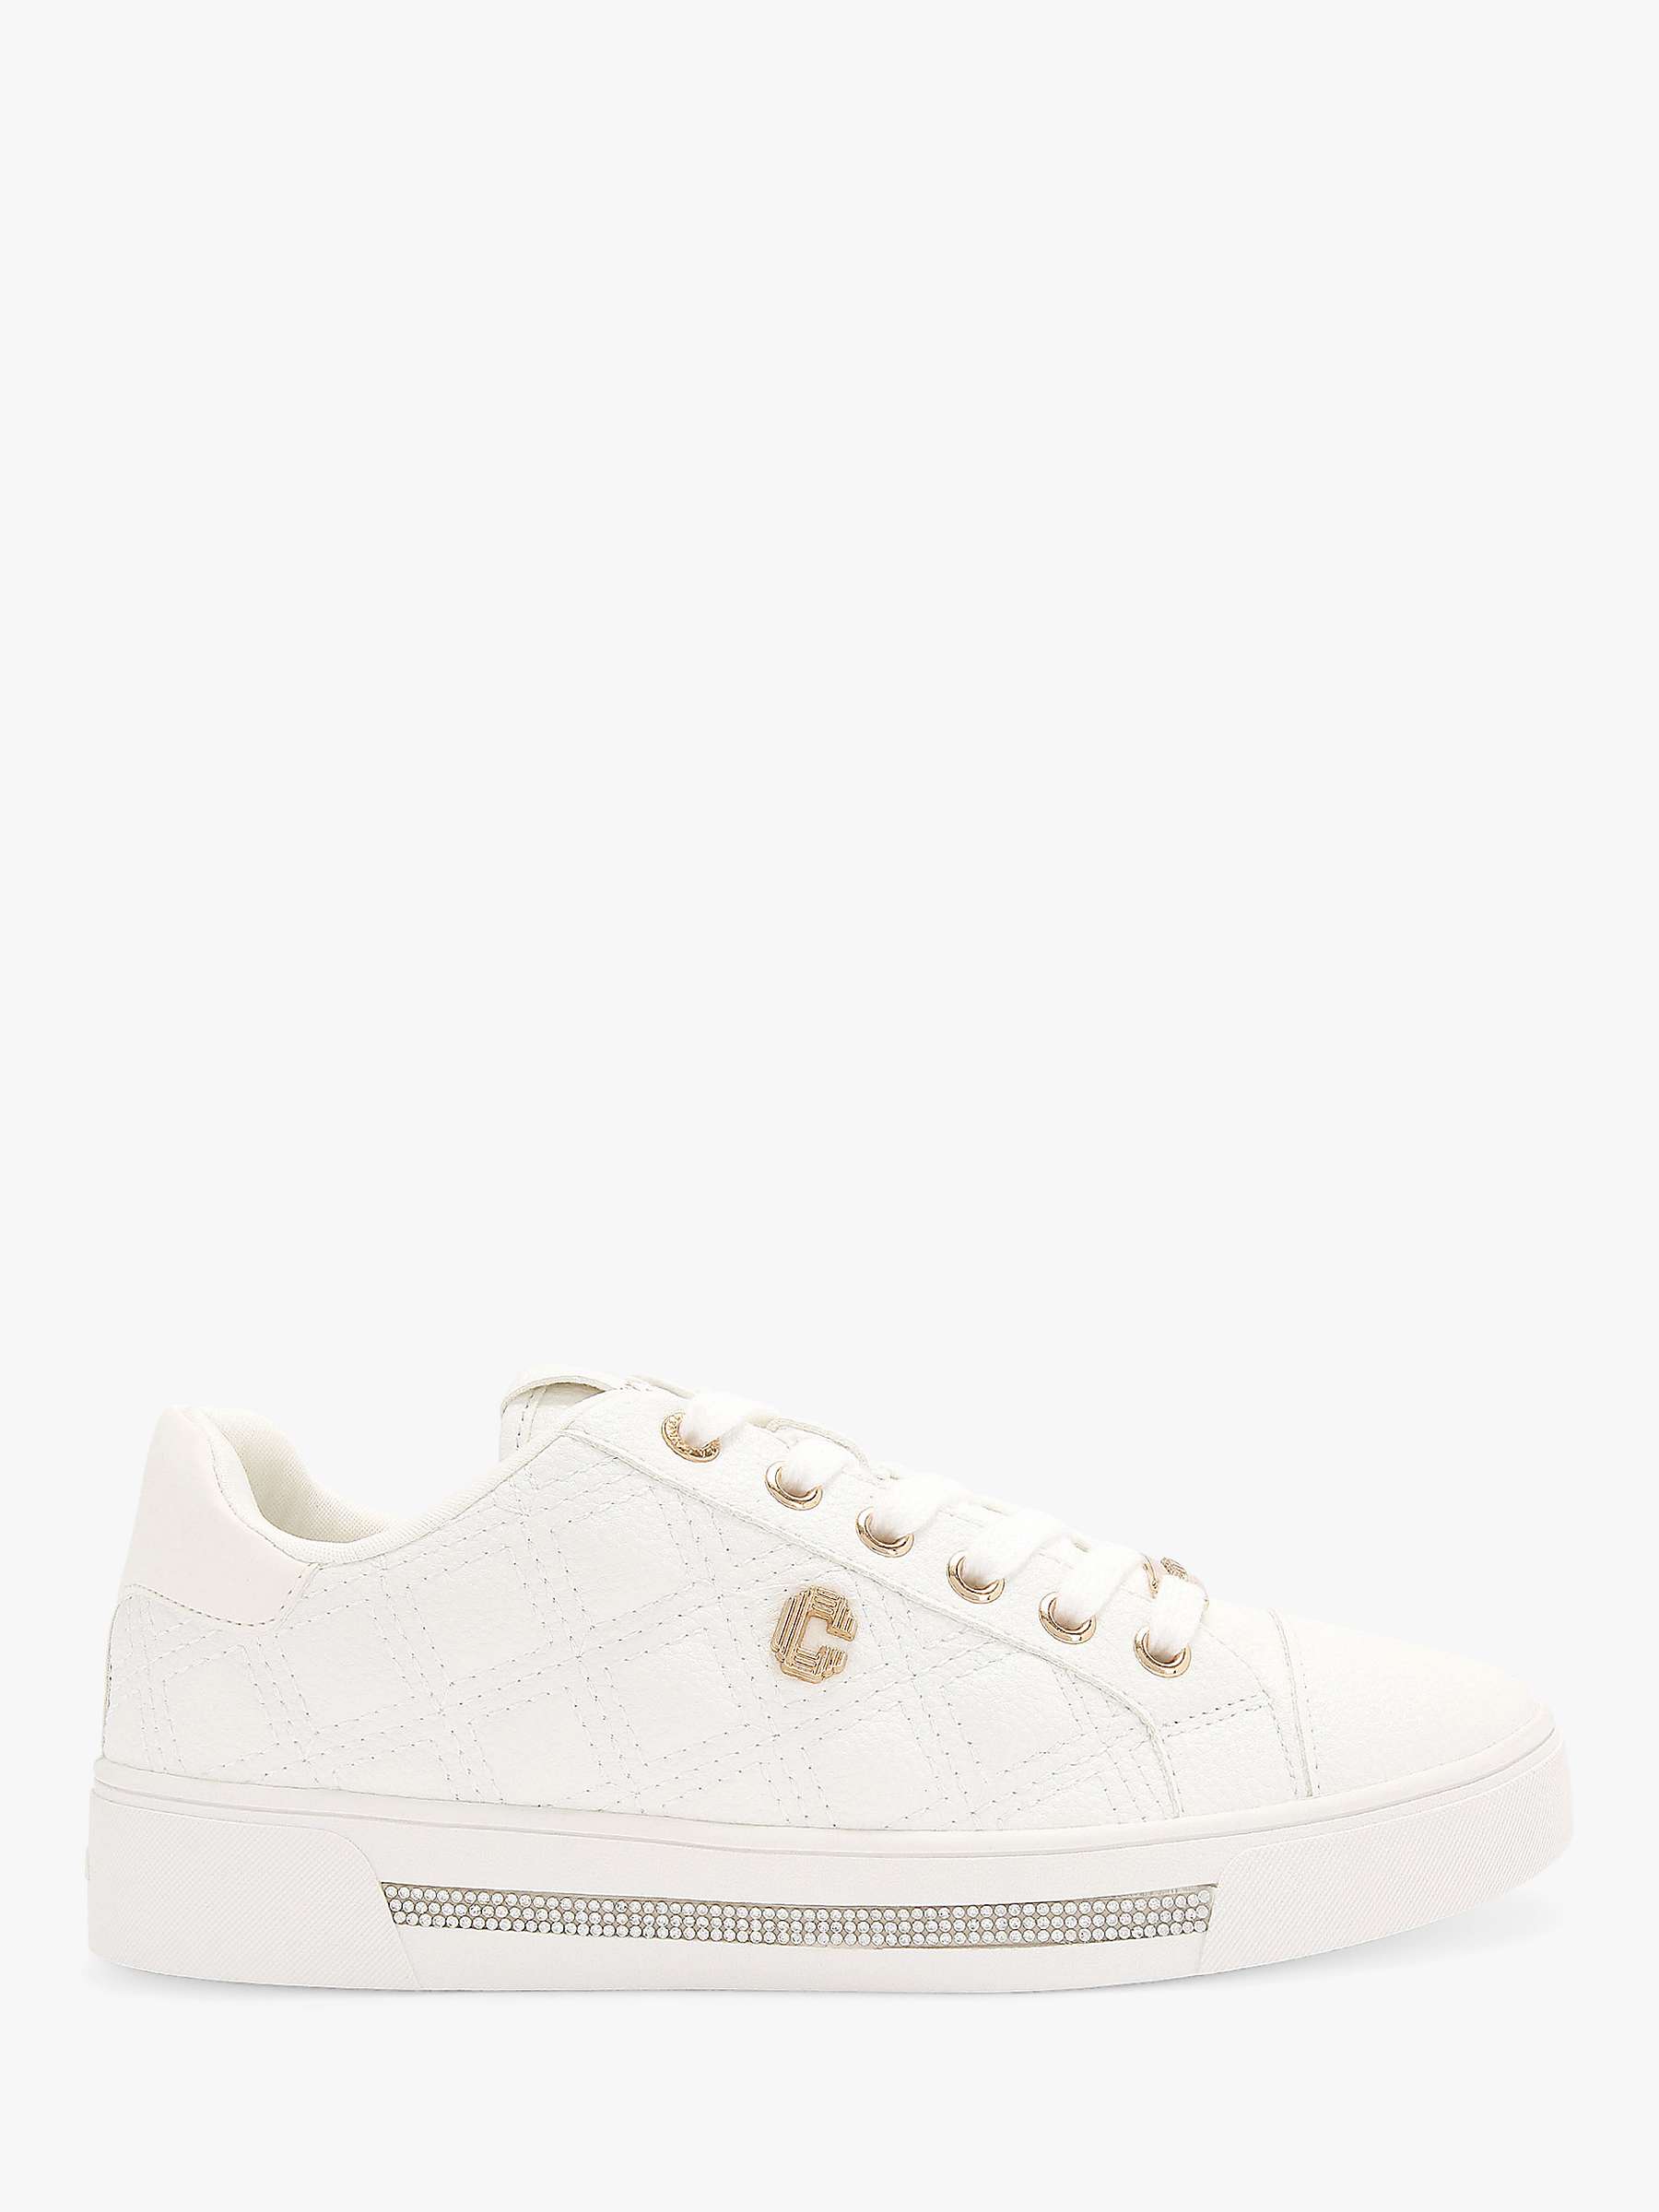 Buy Carvela Diamond Quilt Lace-Up Trainers, White Online at johnlewis.com